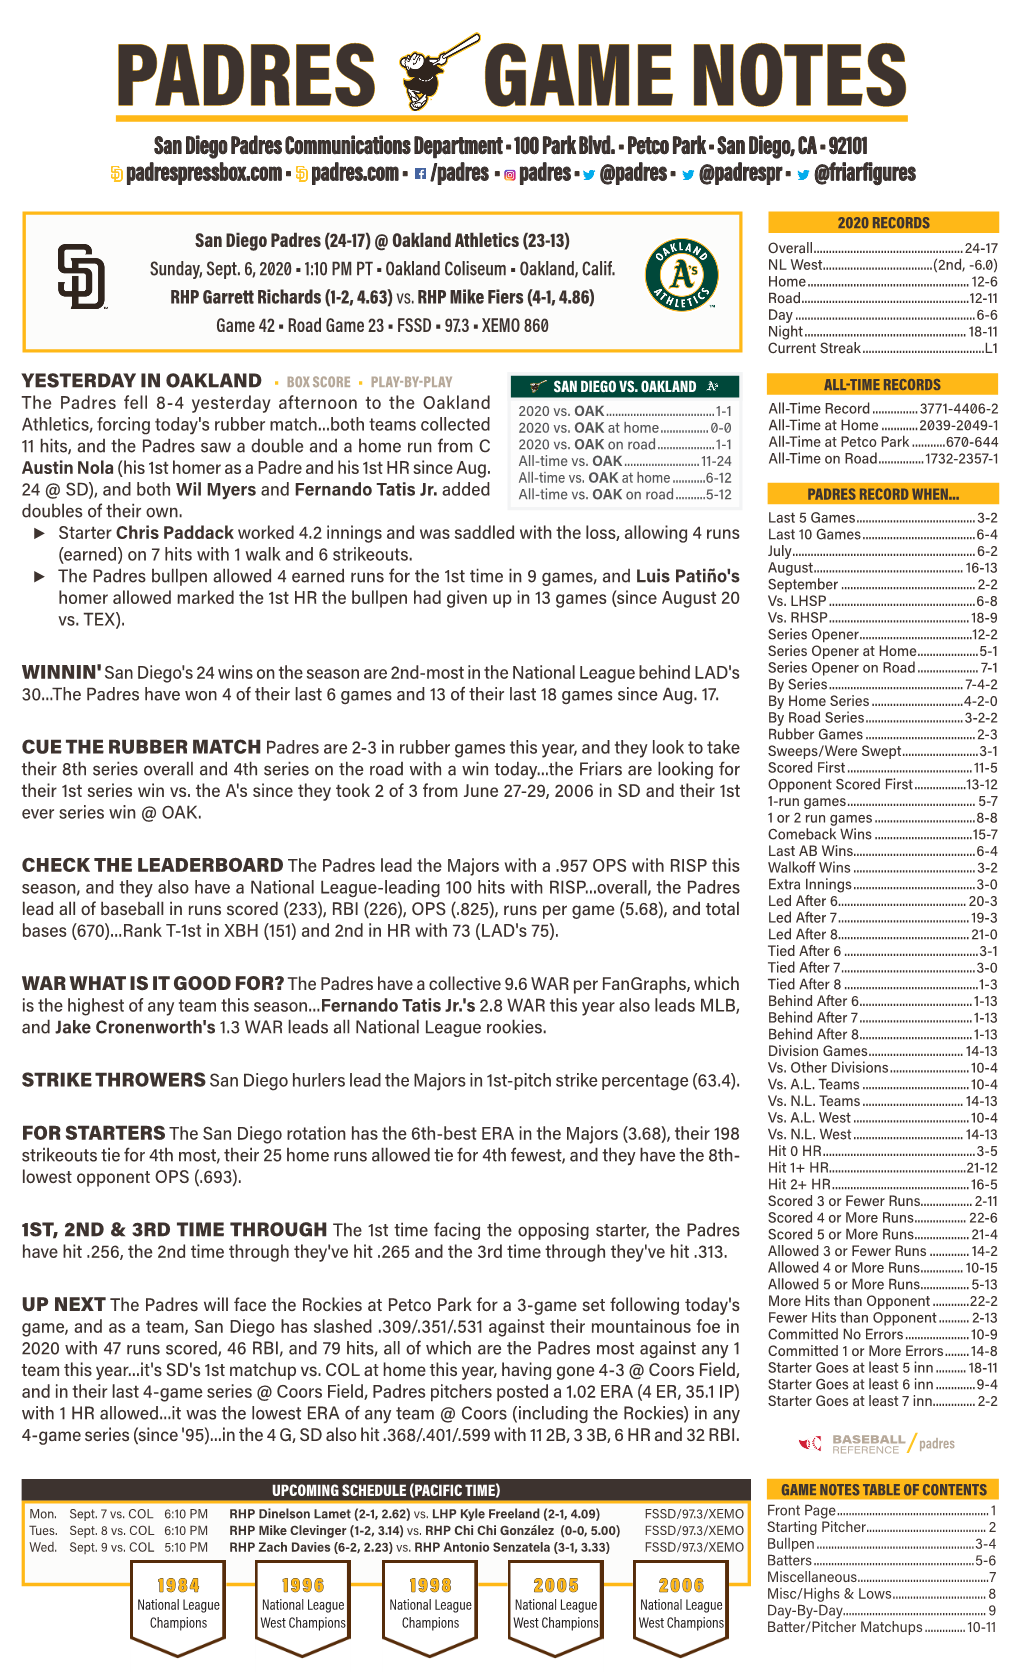 PADRES GAME NOTES San Diego Padres Communications Department • 100 Park Blvd